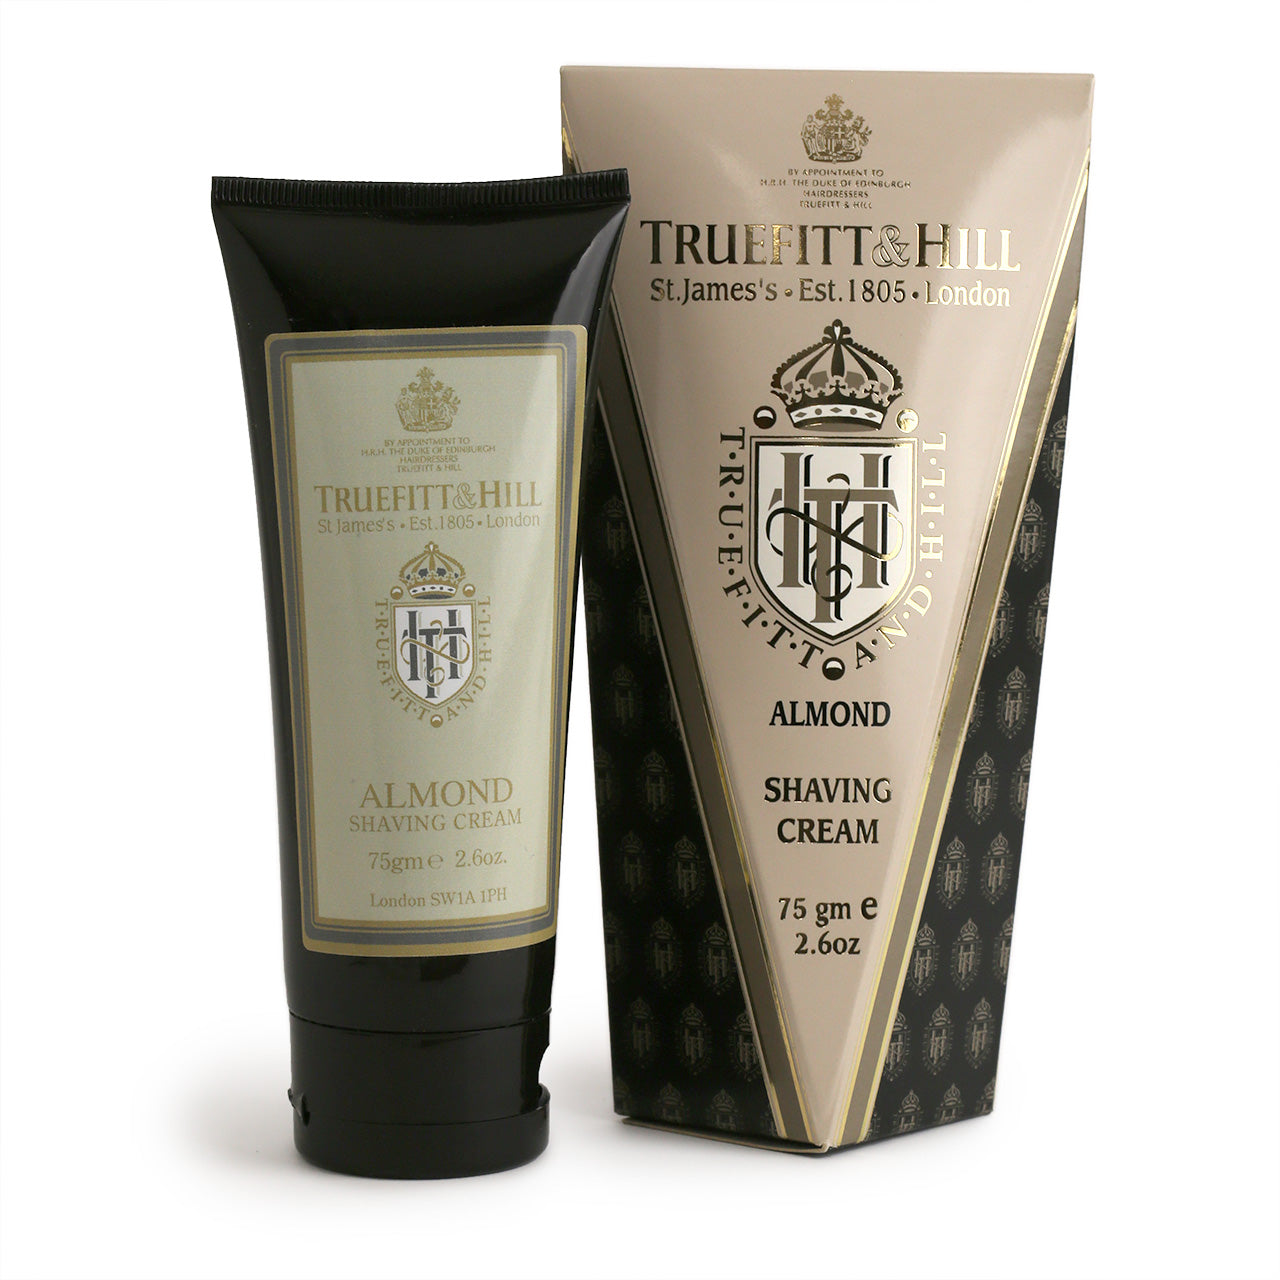 Truefitt & Hill Almond shaving cream is a premium scent with cfreamy lather. Pictured  as black tube beside its irregular-shaped grey, gold and cream box